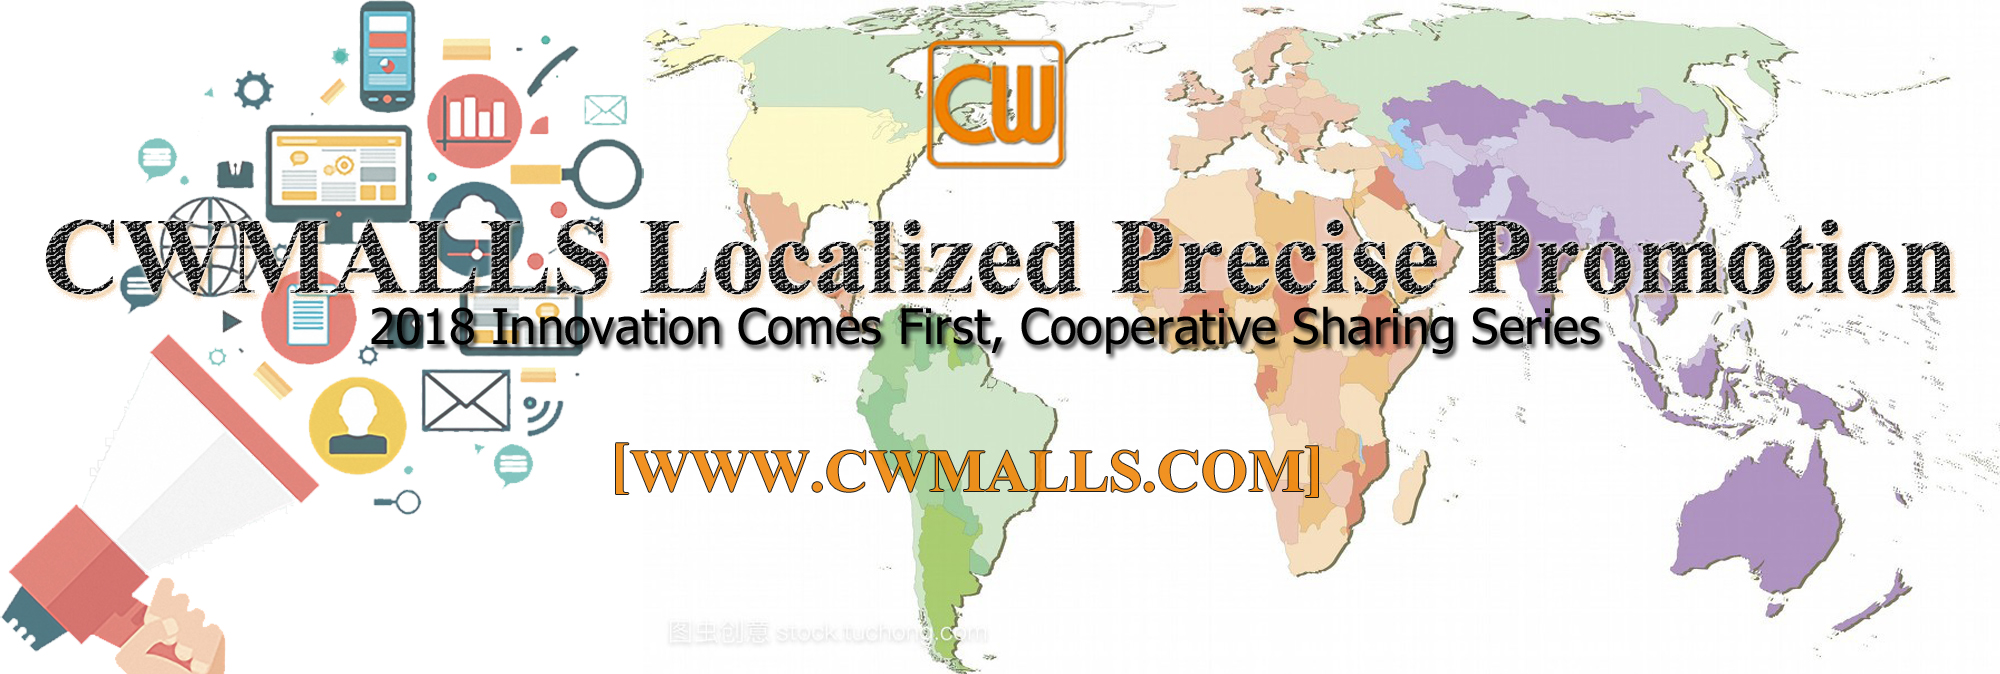 CWMALLS Localized Precise Promotion